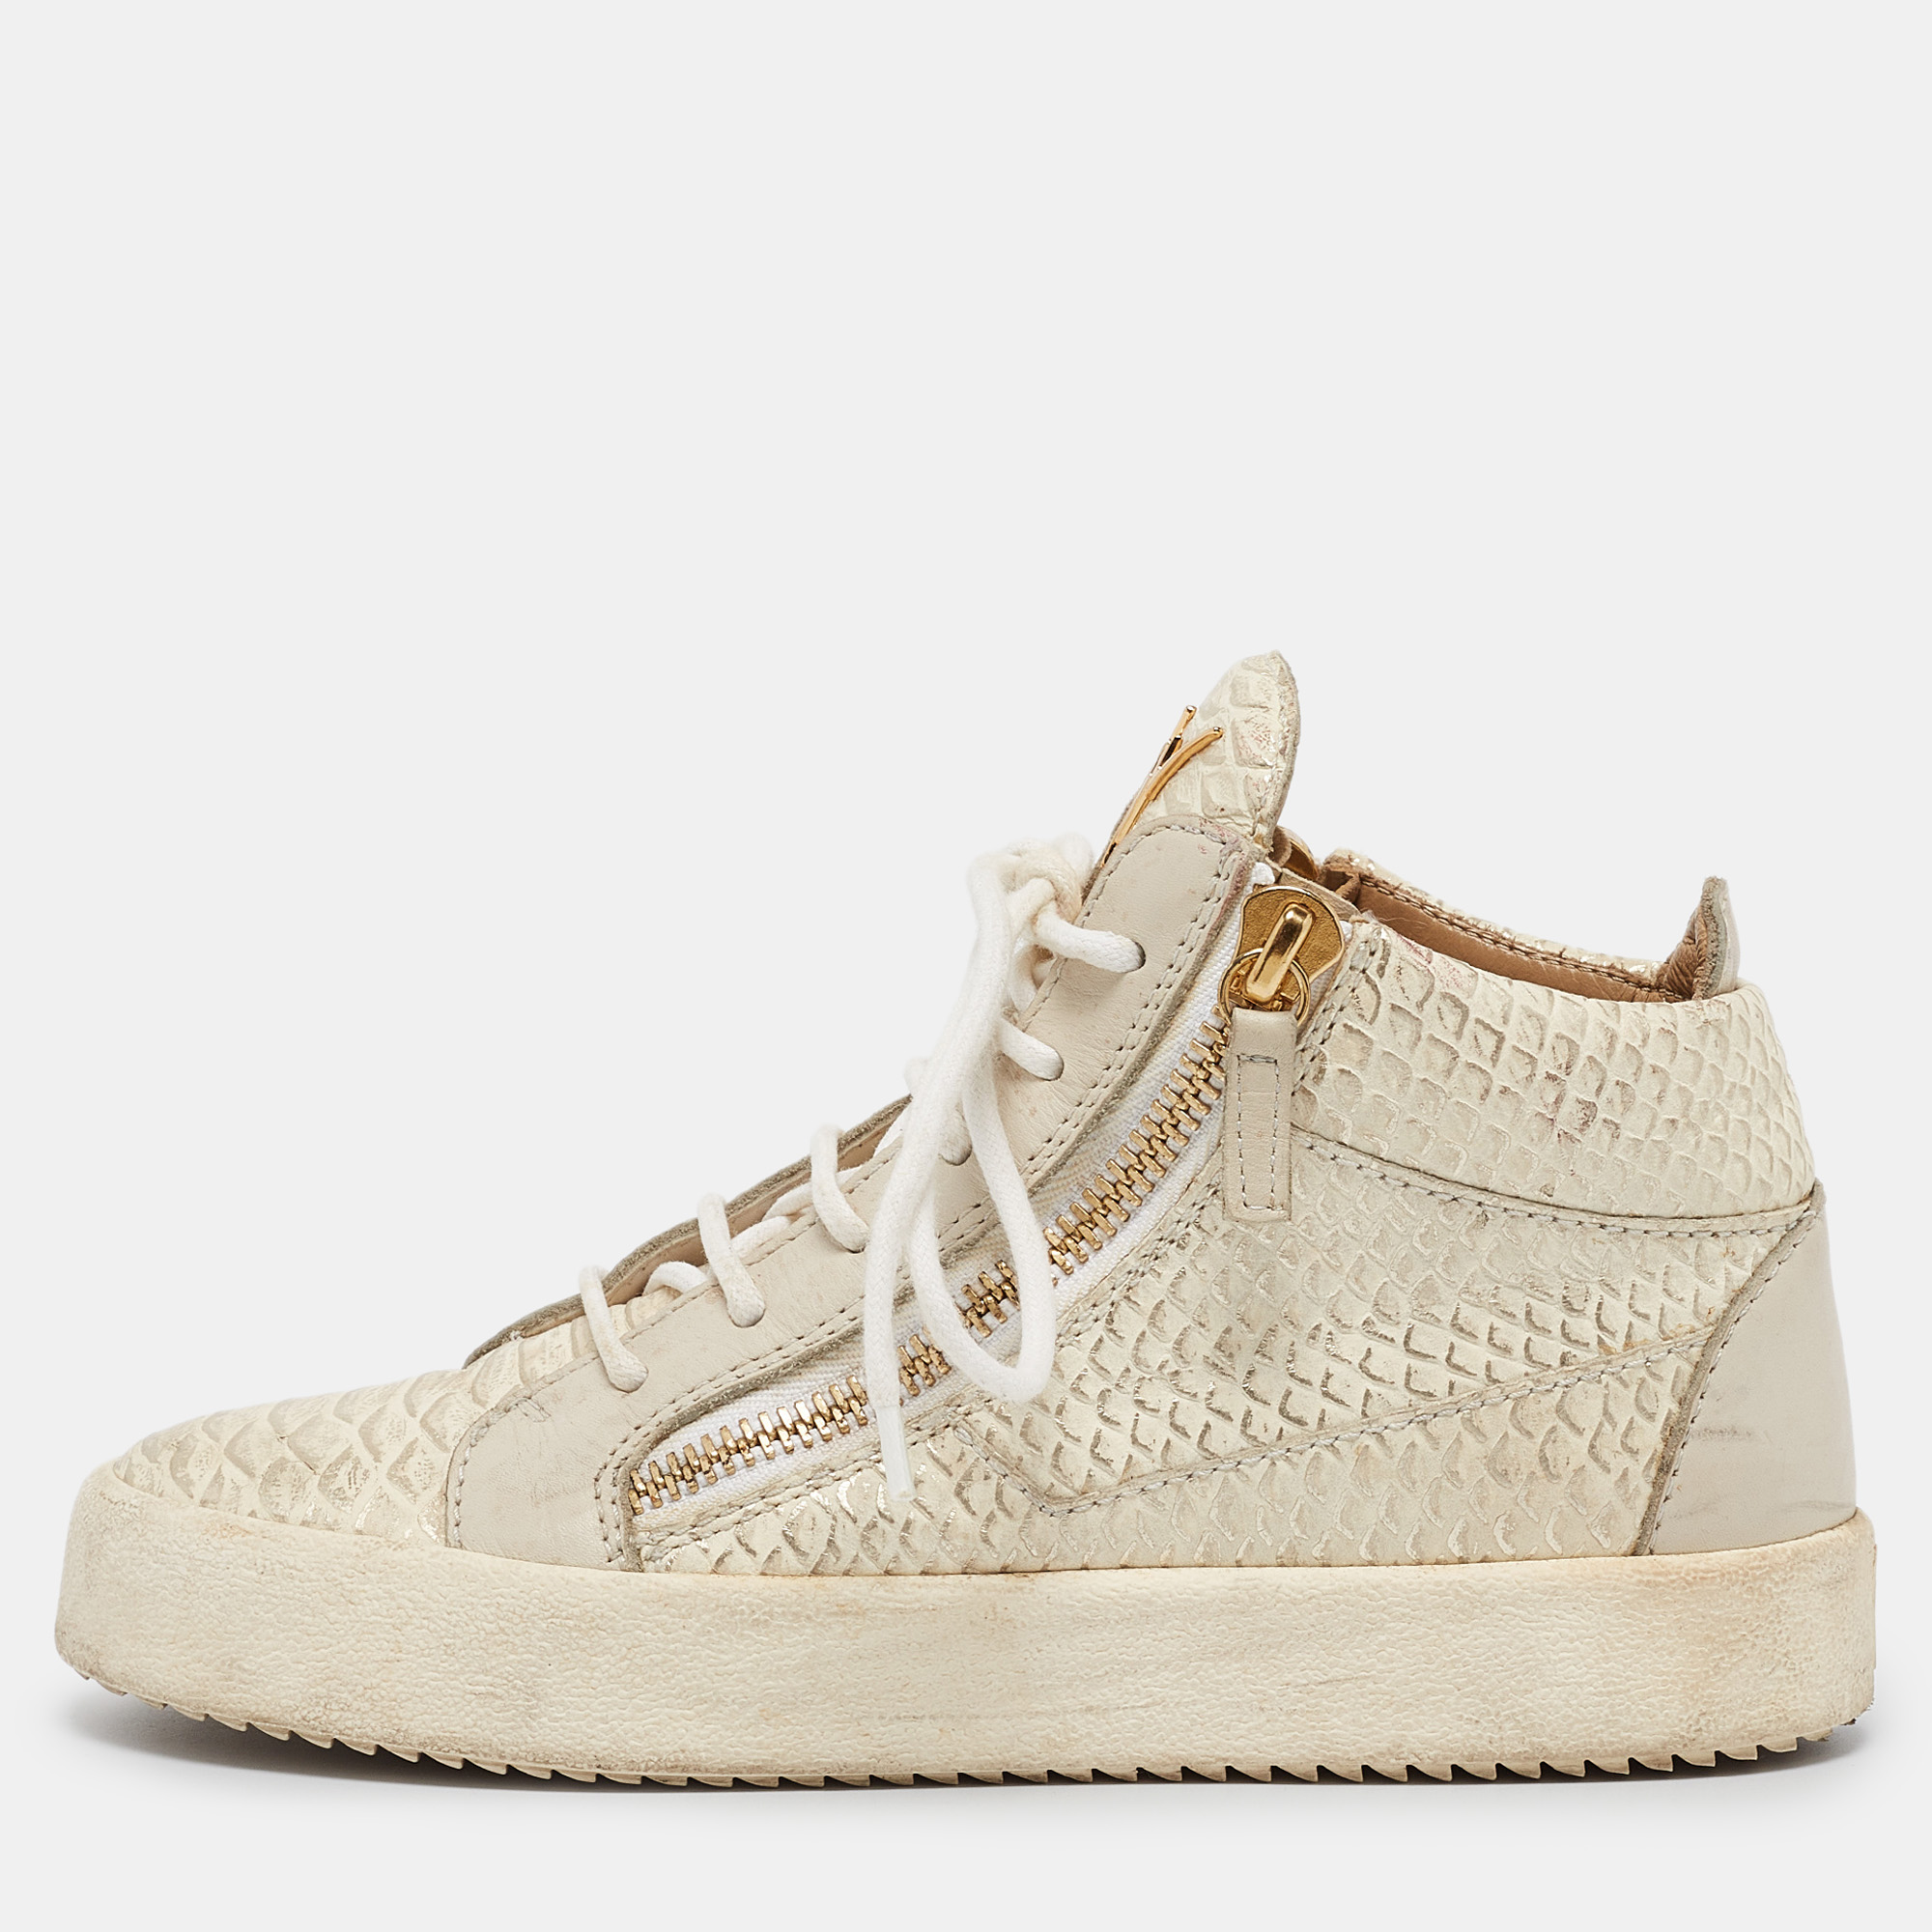 

Giuseppe Zanotti Cream Python Embossed Leather Double Zip High Top Sneakers Size